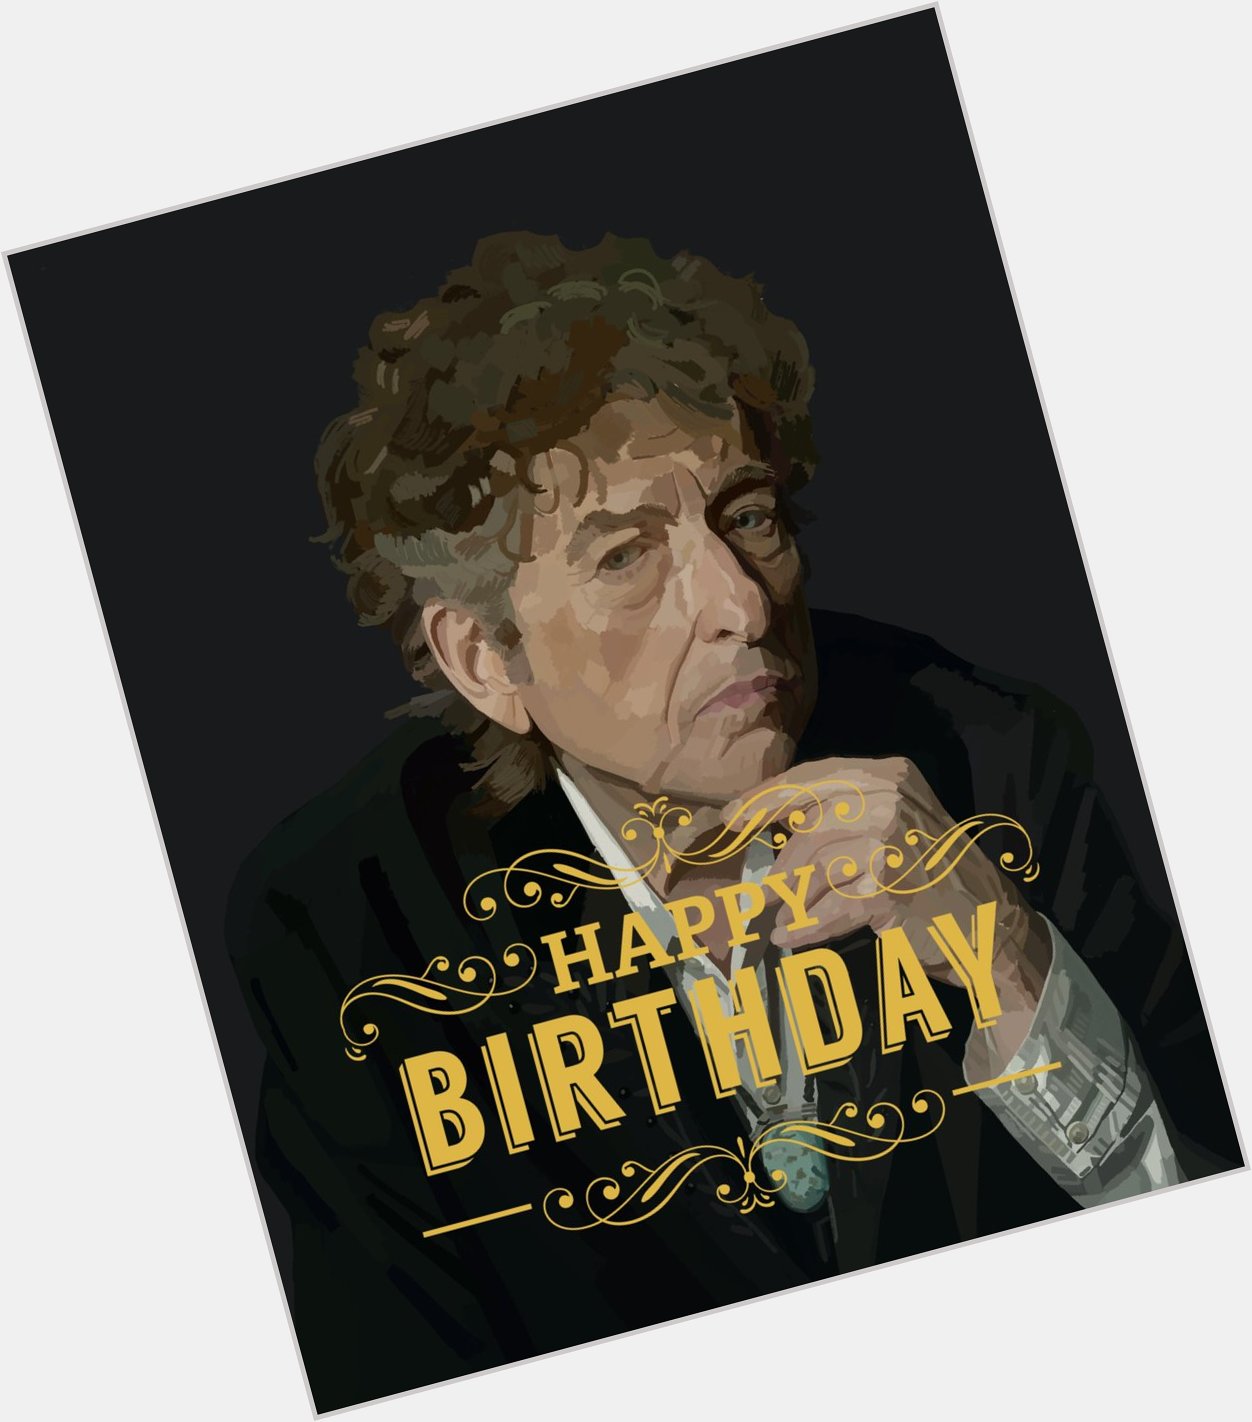 How lucky are we to live at the same time as Bob Dylan. 
Happy 81st birthday   